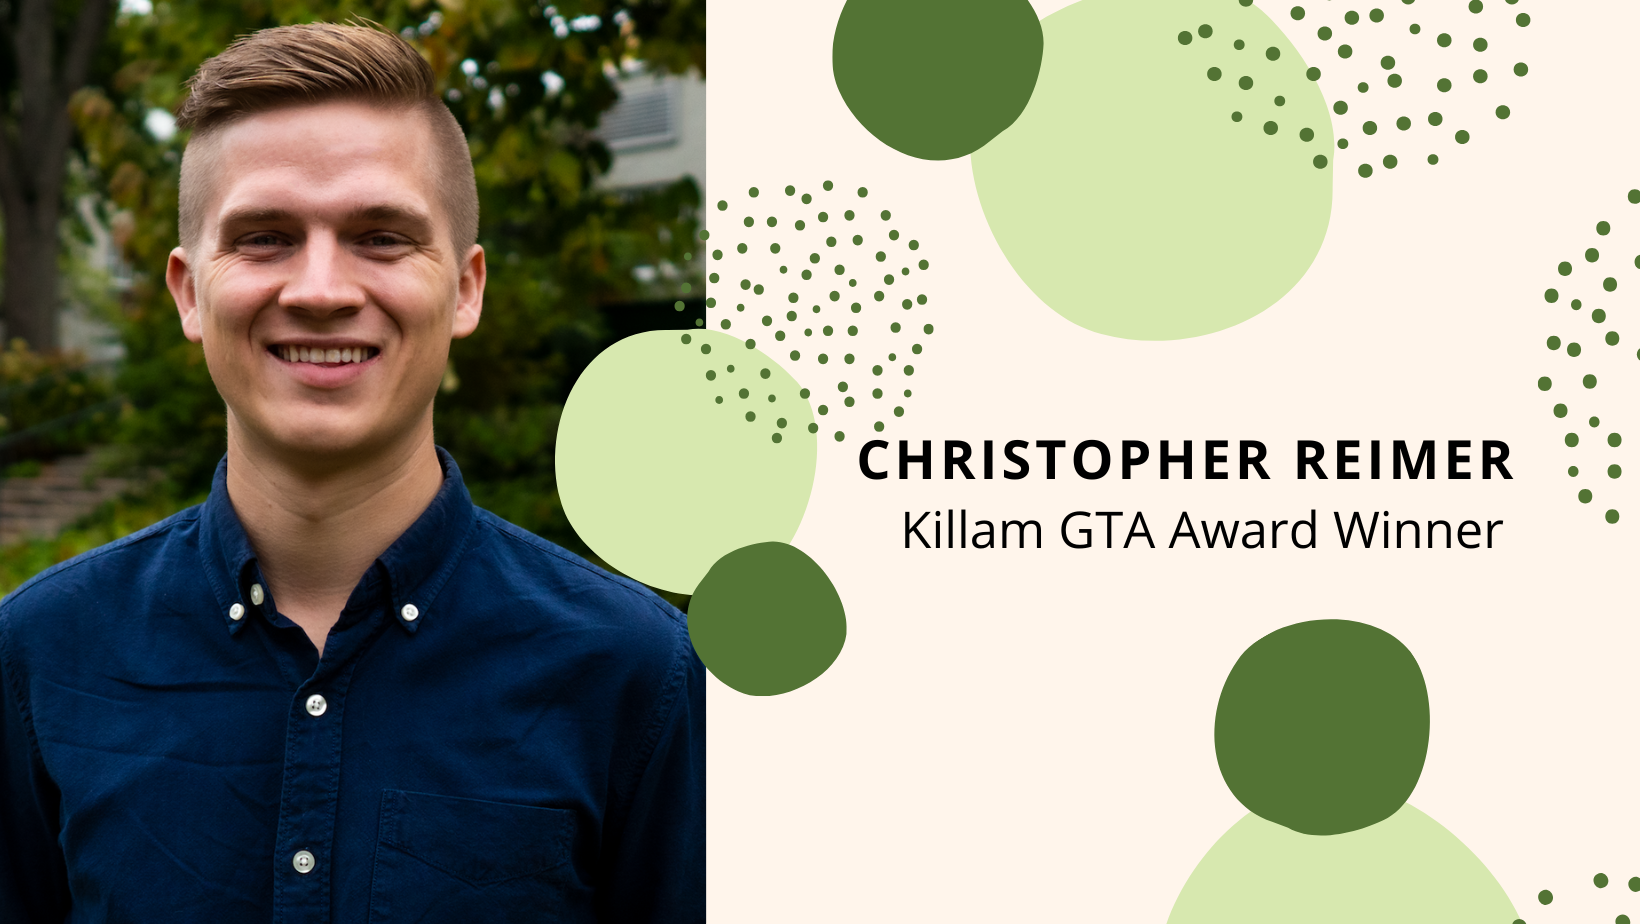 Chris is a young white man, smiling at the camera wearing a dark blue shirt. Text reads: Christopher Reimer, Killam GTA Award Winner